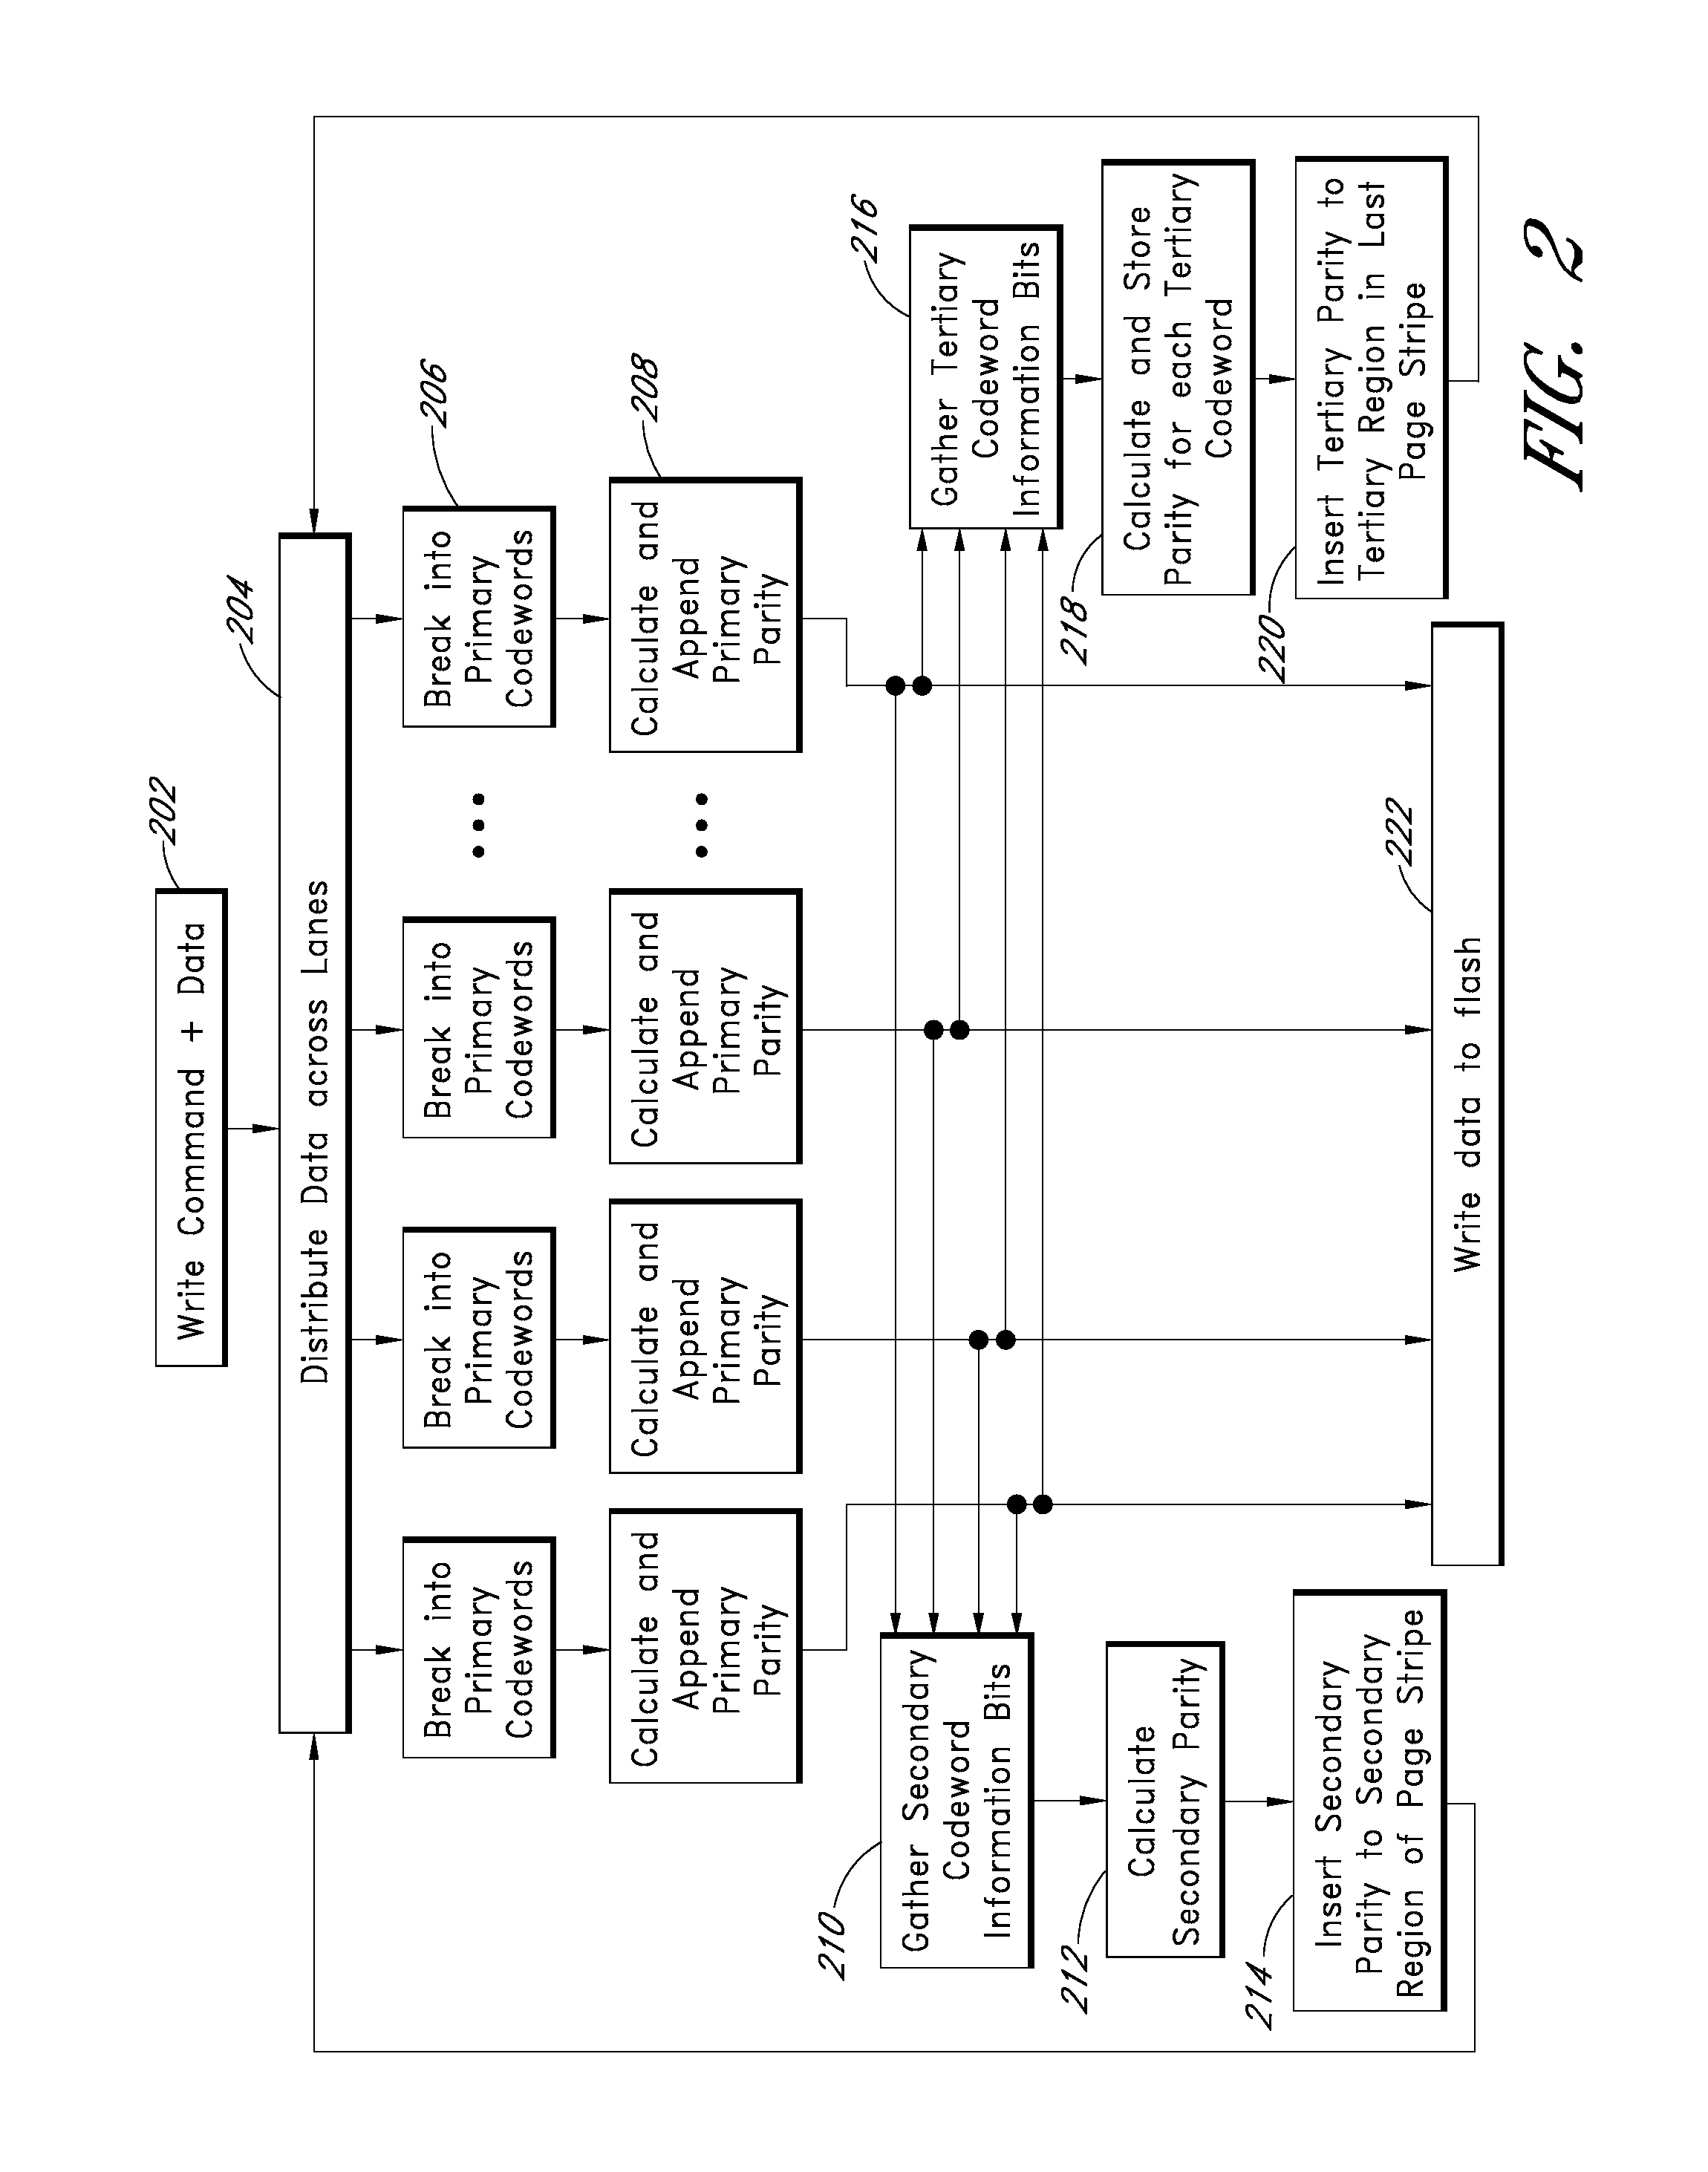 Systems and methods for adaptively selecting from among a plurality of error correction coding schemes in a flash drive for robustness and low latency